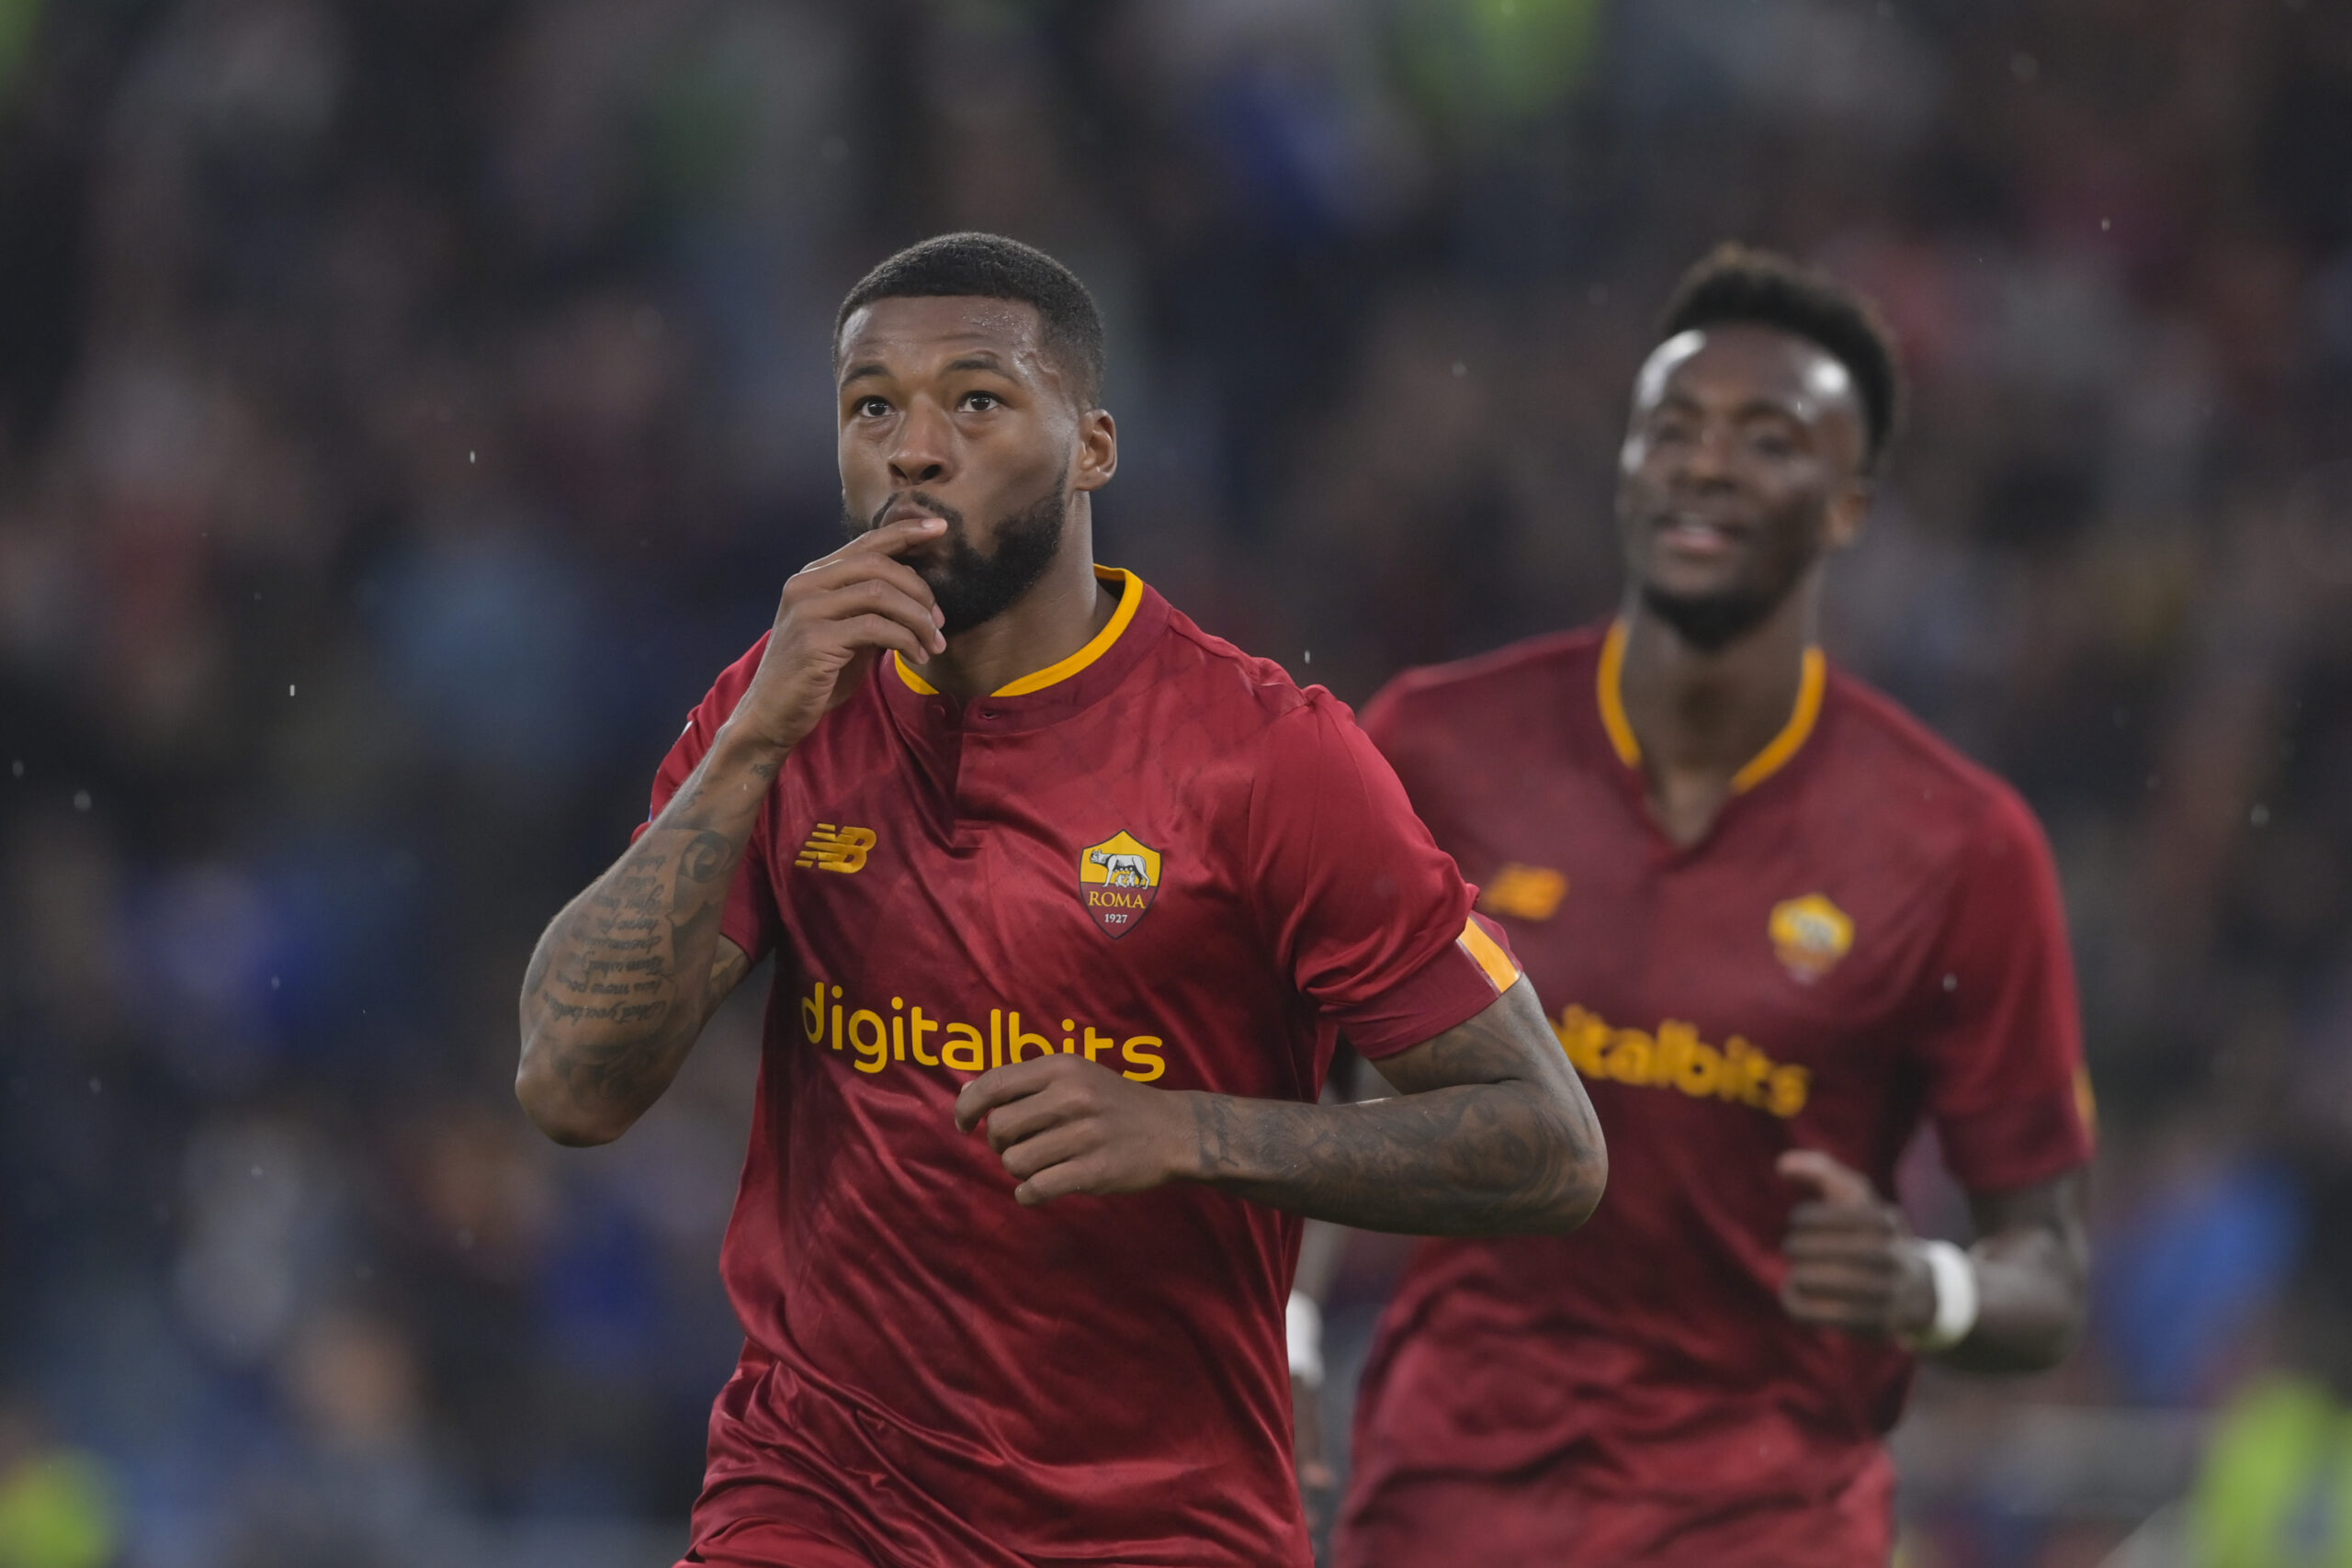 Georginio Wijnaldum had his best game since moving to Serie A versus Sampdoria, as he scored, hit the post, and drew a penalty kick.